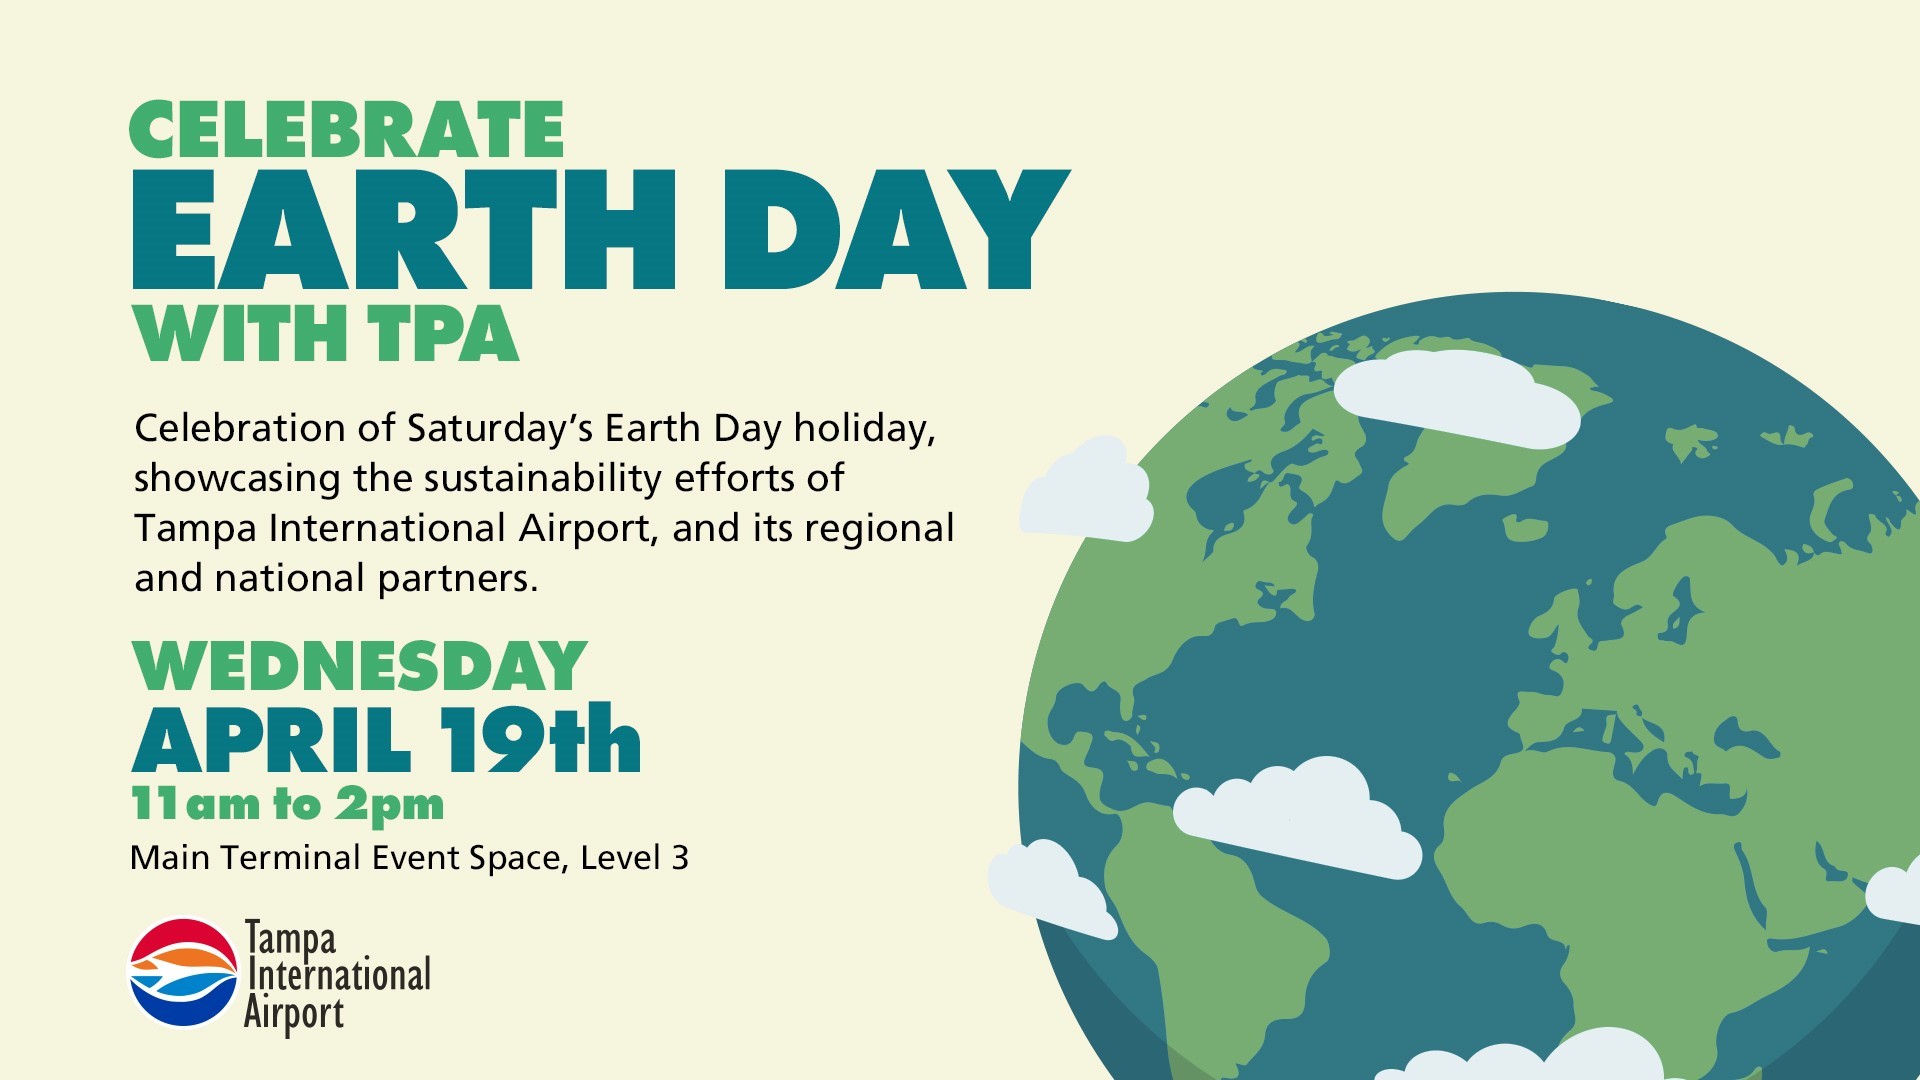 TPA and community partners to showcase their green initiatives in honor of Earth Day